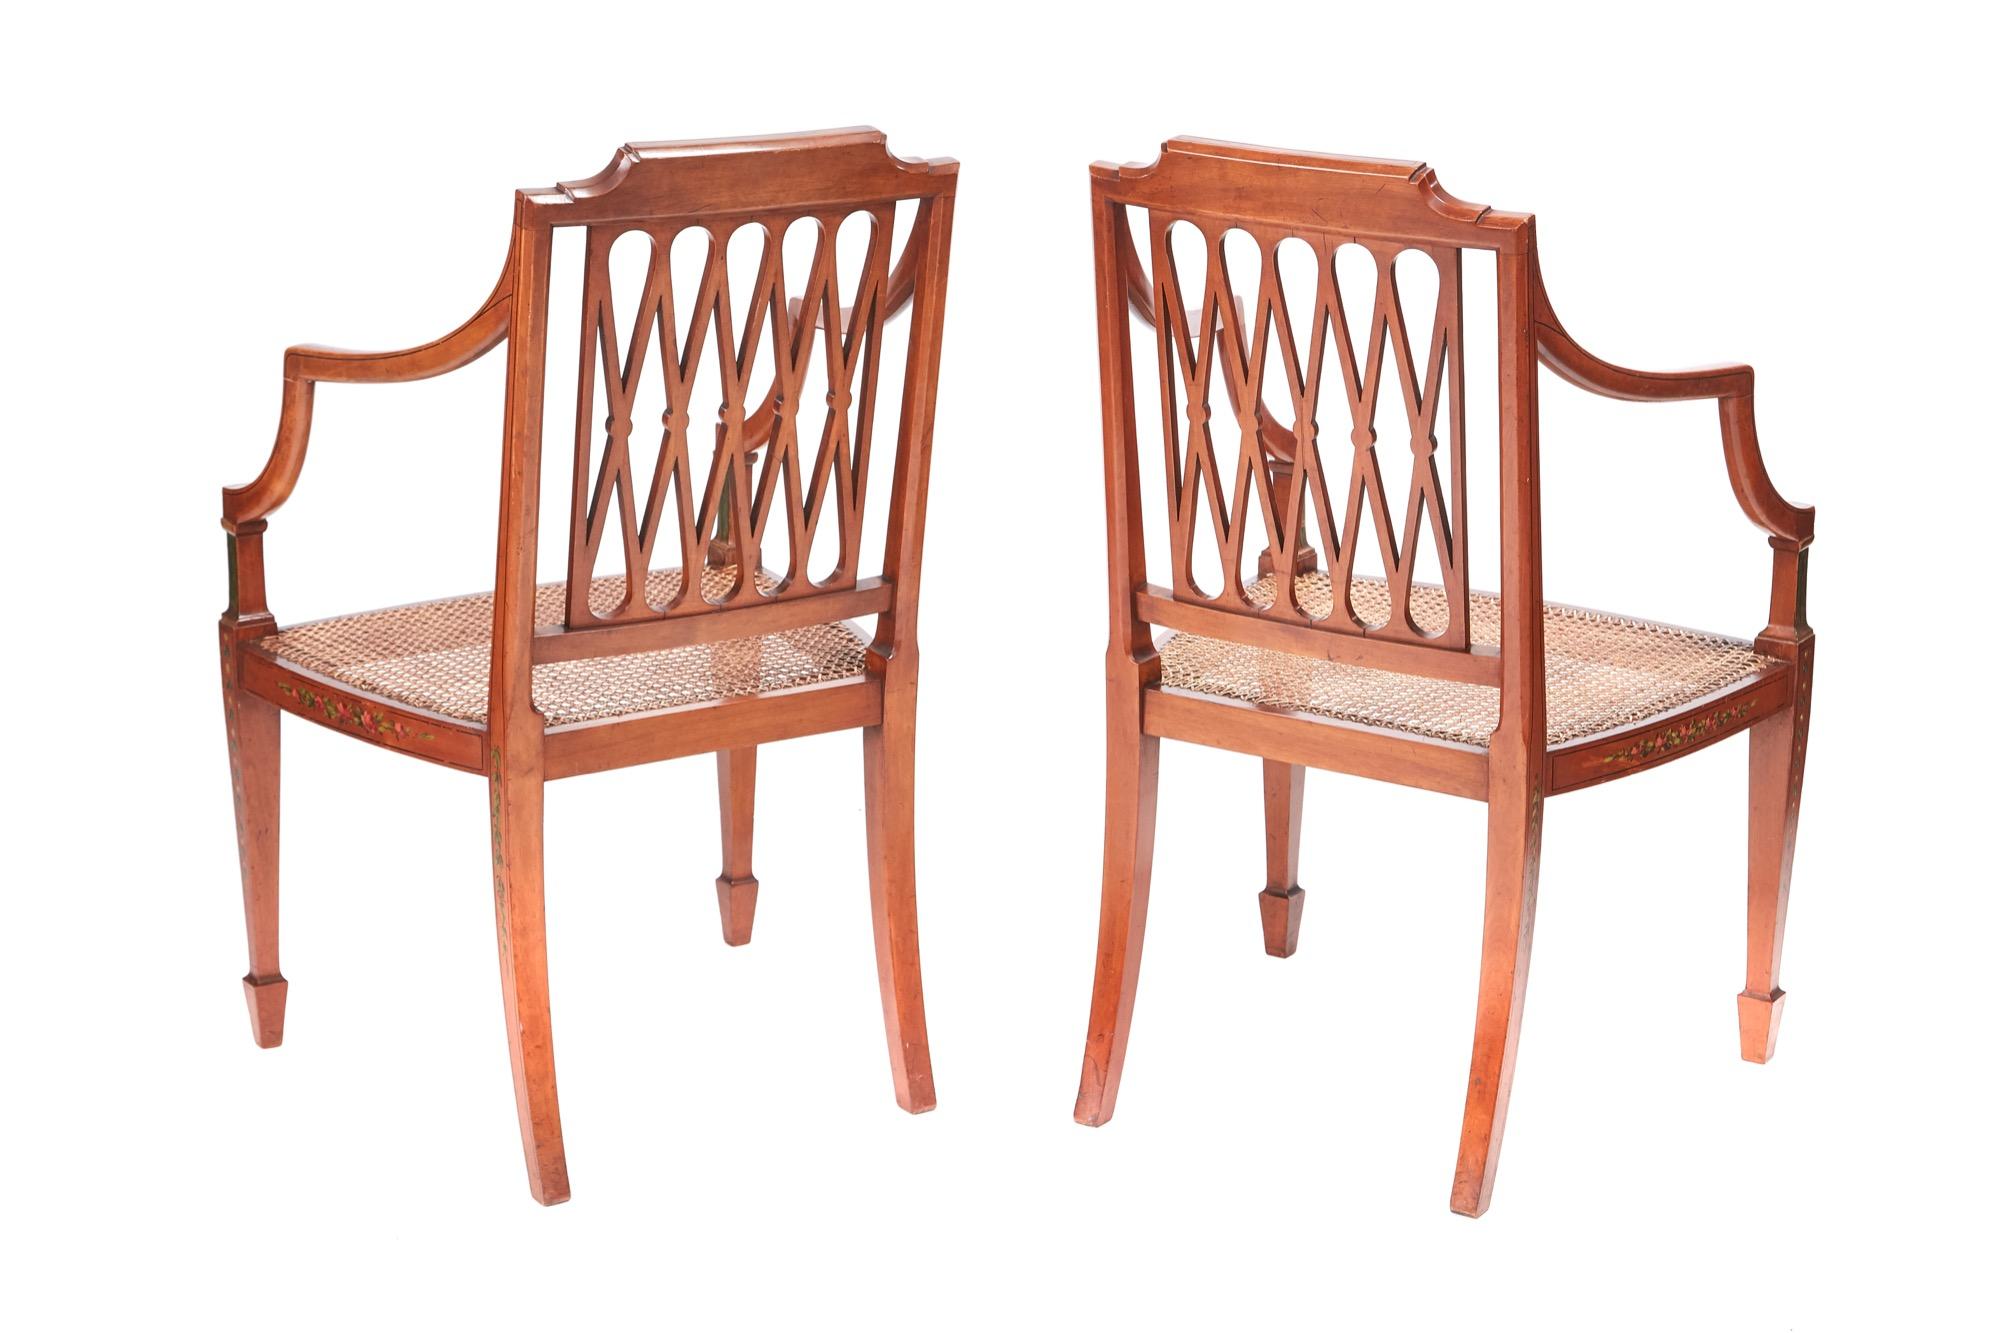 Fine quality pair of original painted satinwood arm chairs, with lovely original painted decoration all over each chair, lovely shaped open arms, standing on square tapering legs with spade feet to the front outswept back legs.
Fantastic color and